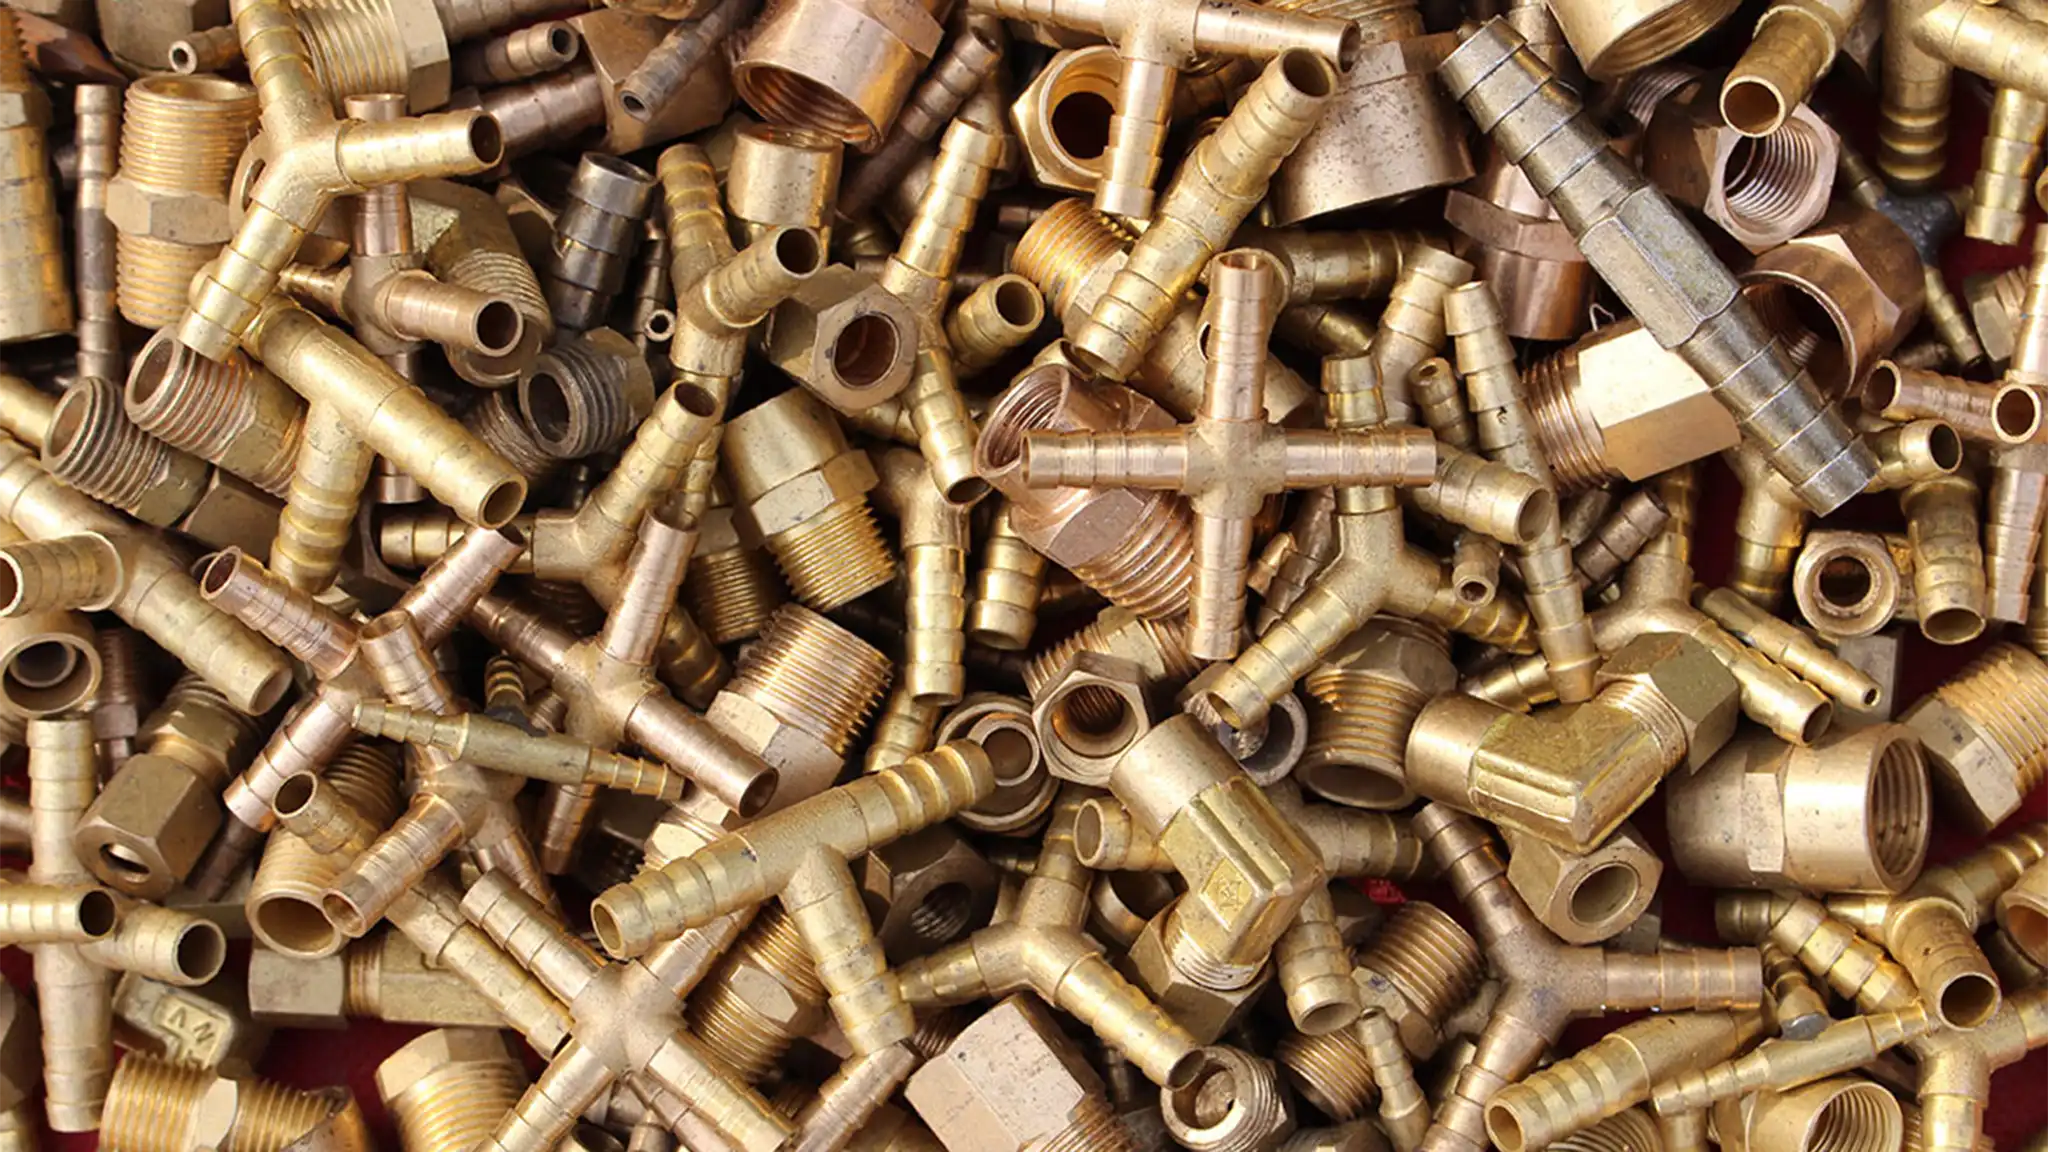 NST Hitech Recycling - Red Brass Scrap Services, Red Brass Scrap